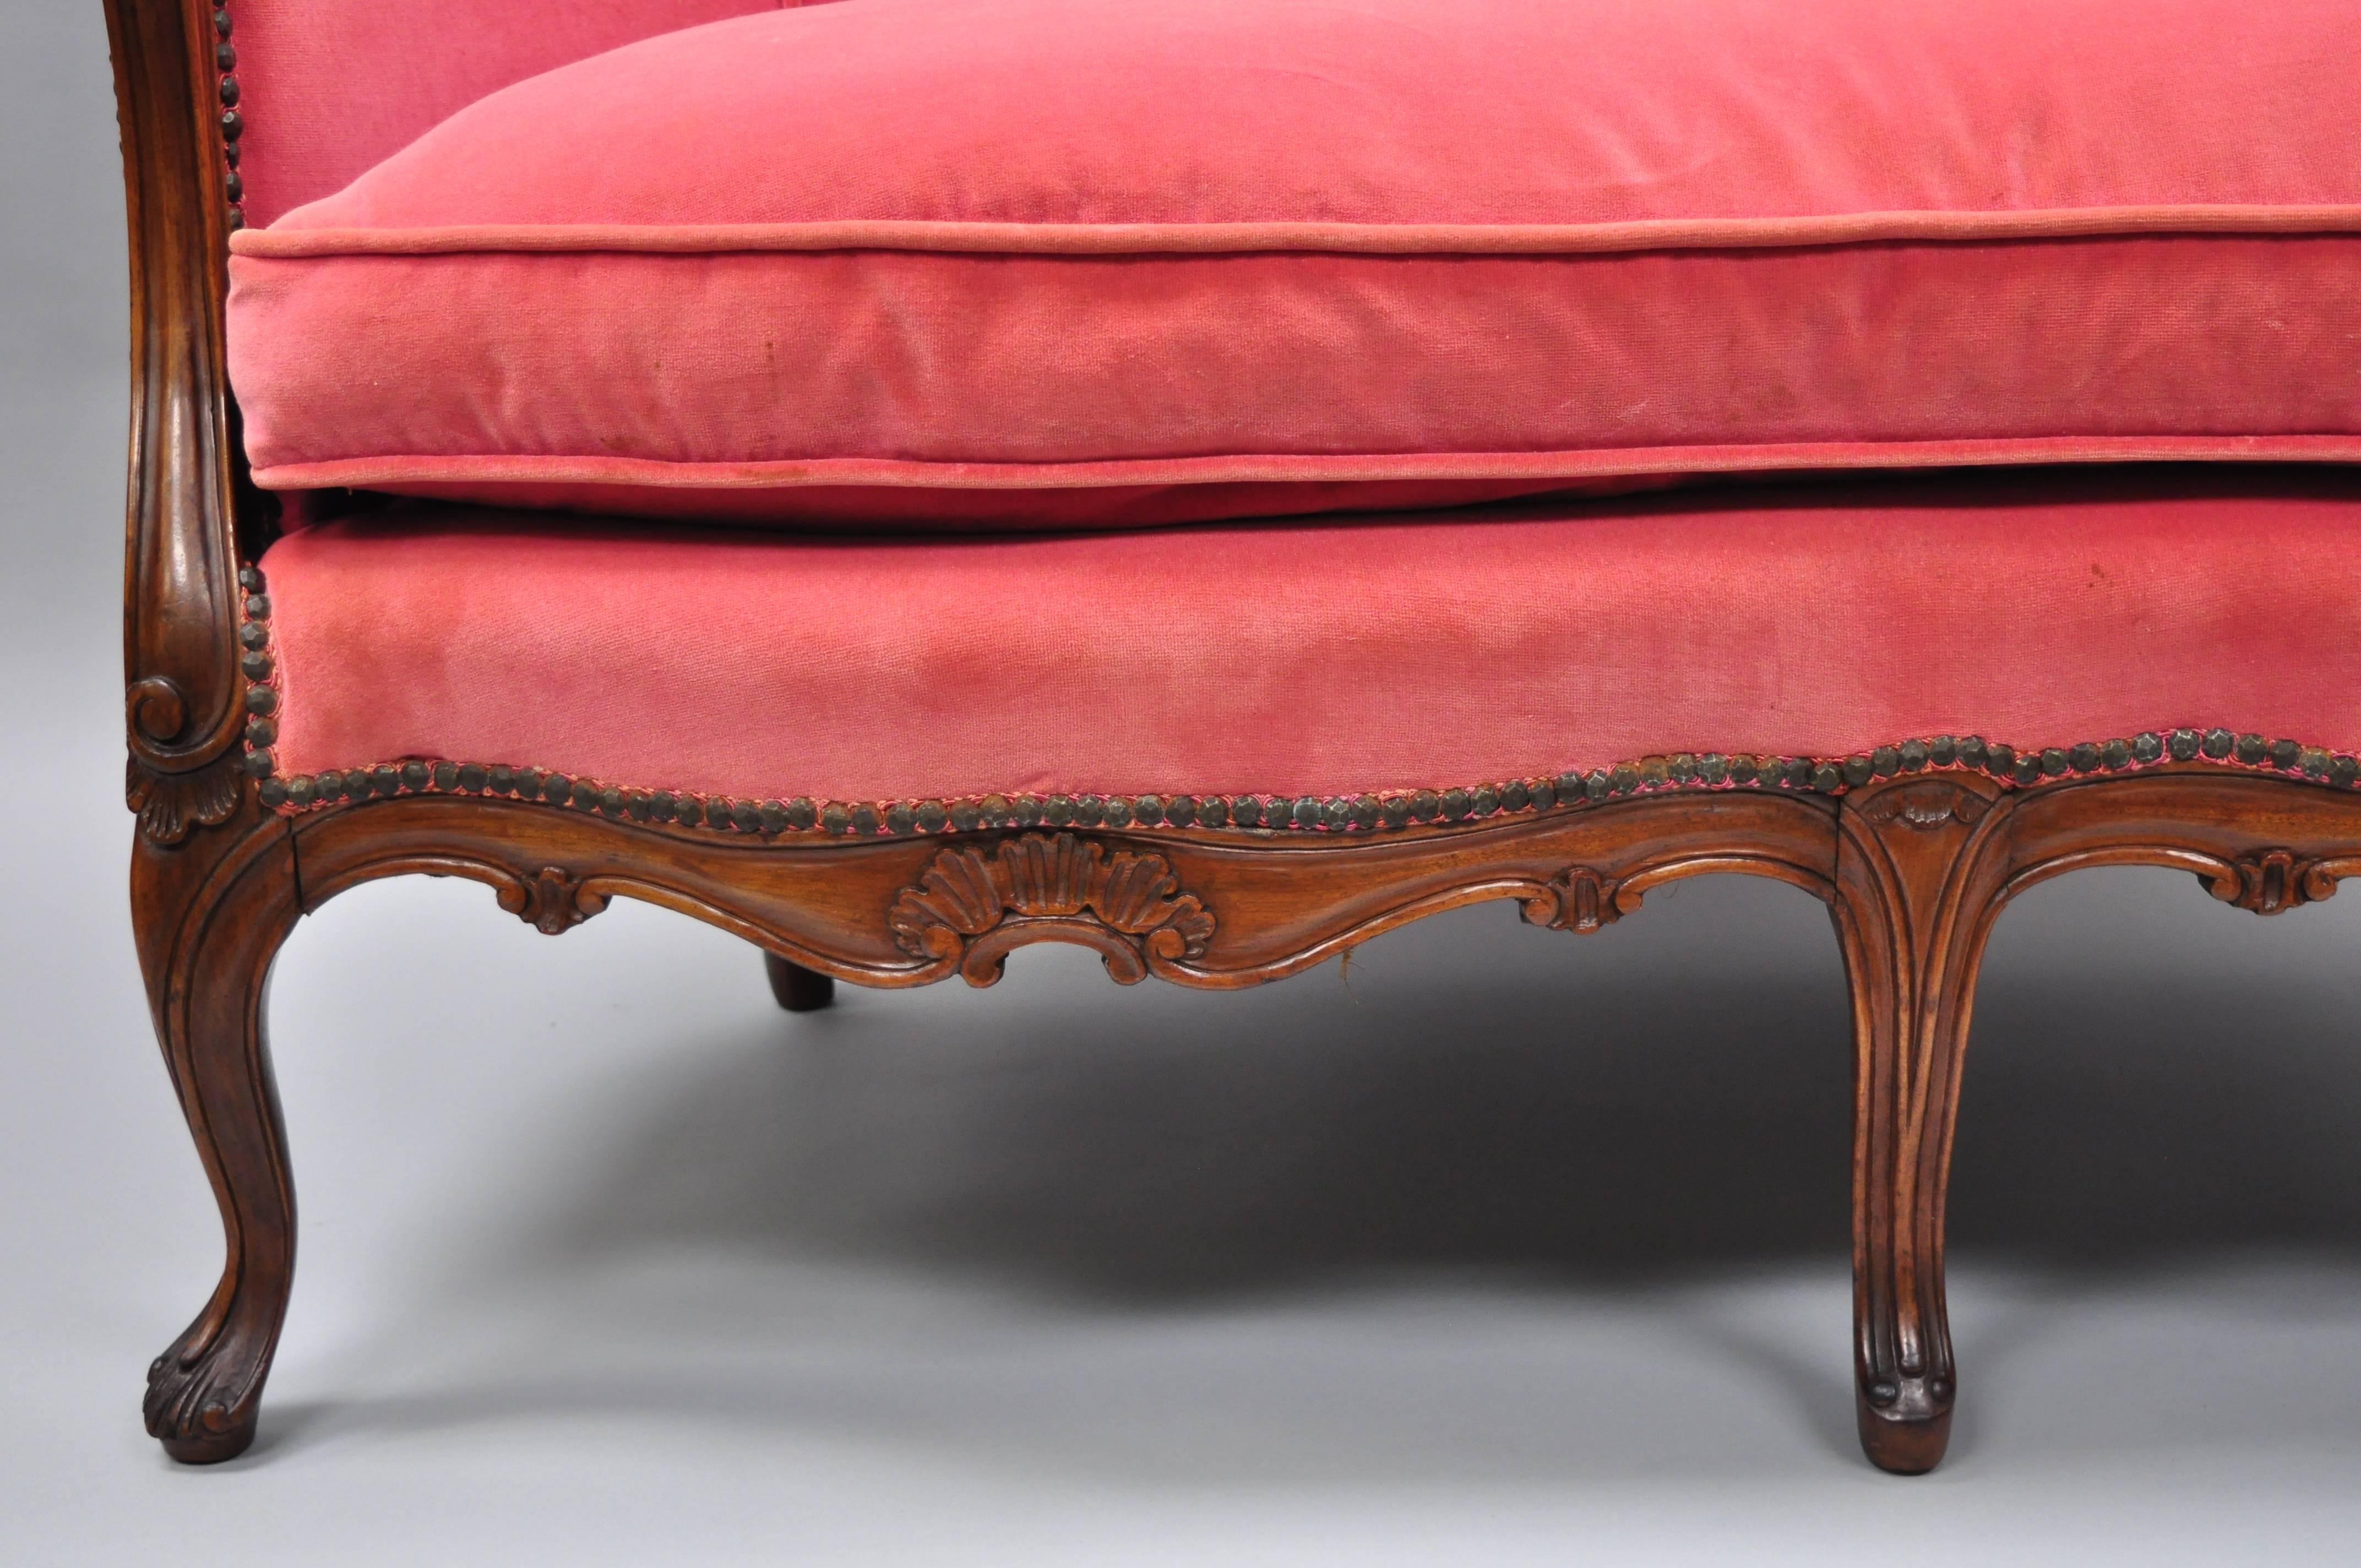 Fabric Antique French Louis XV Style Carved Walnut Settee Loveseat Canapé Pink Sofa